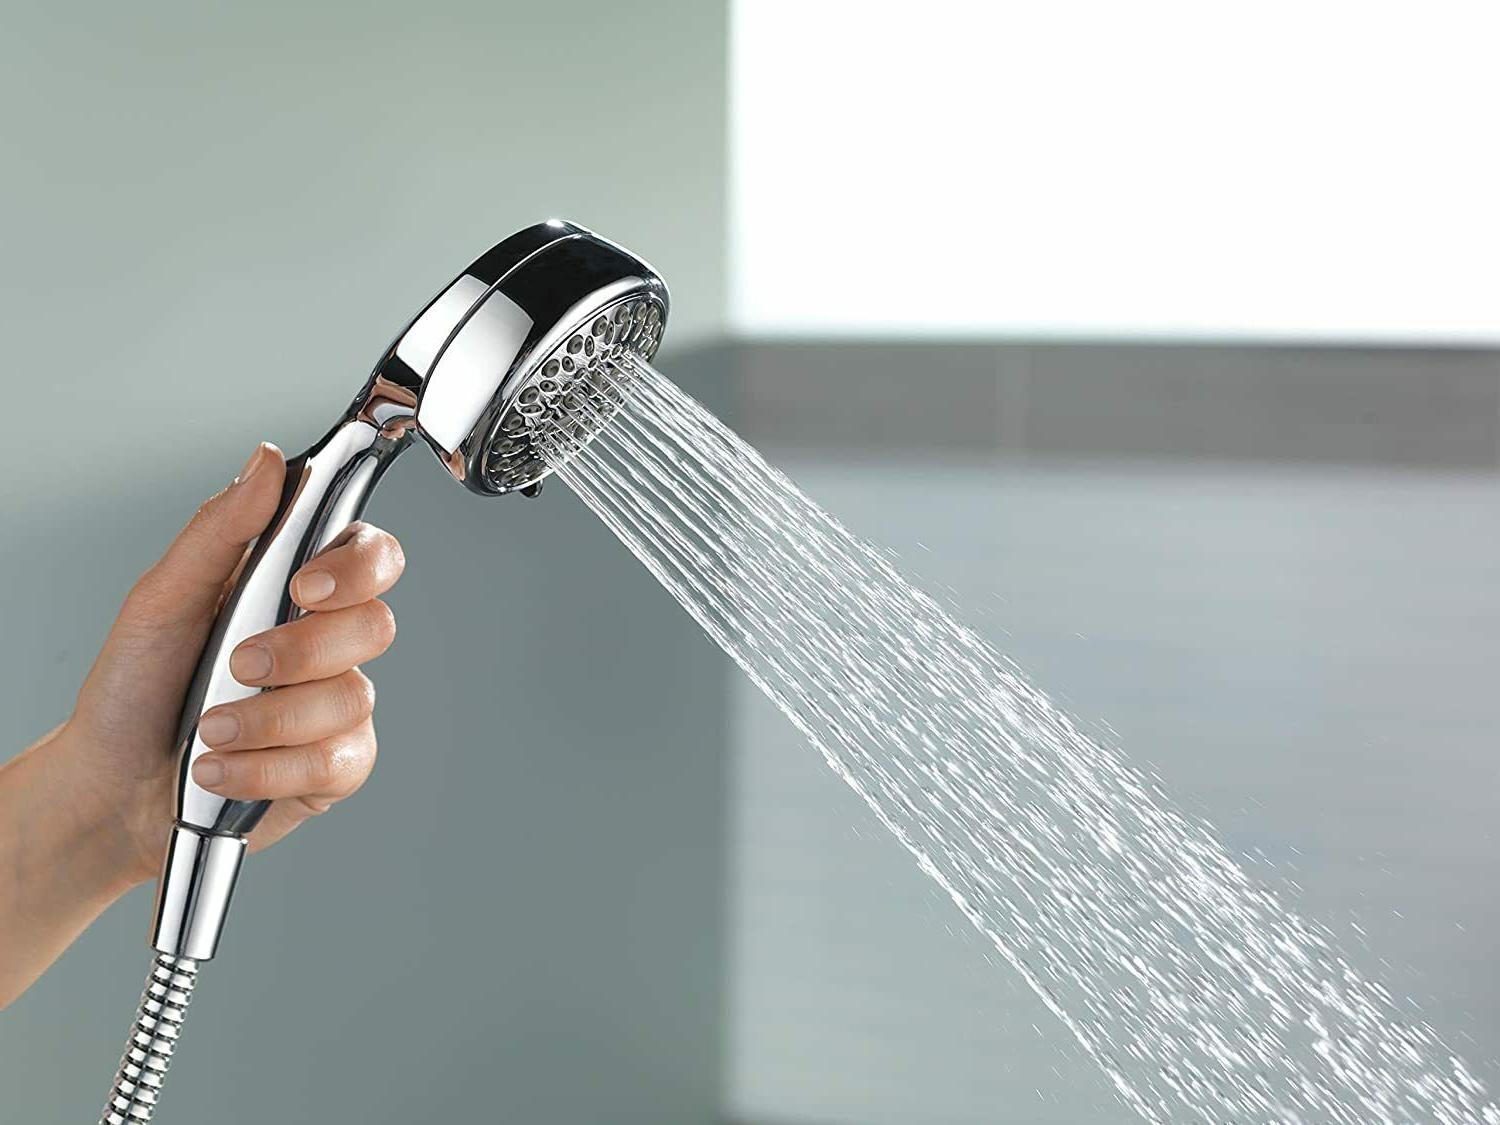 How Do You Turn It On A Delta Handheld Showerhead